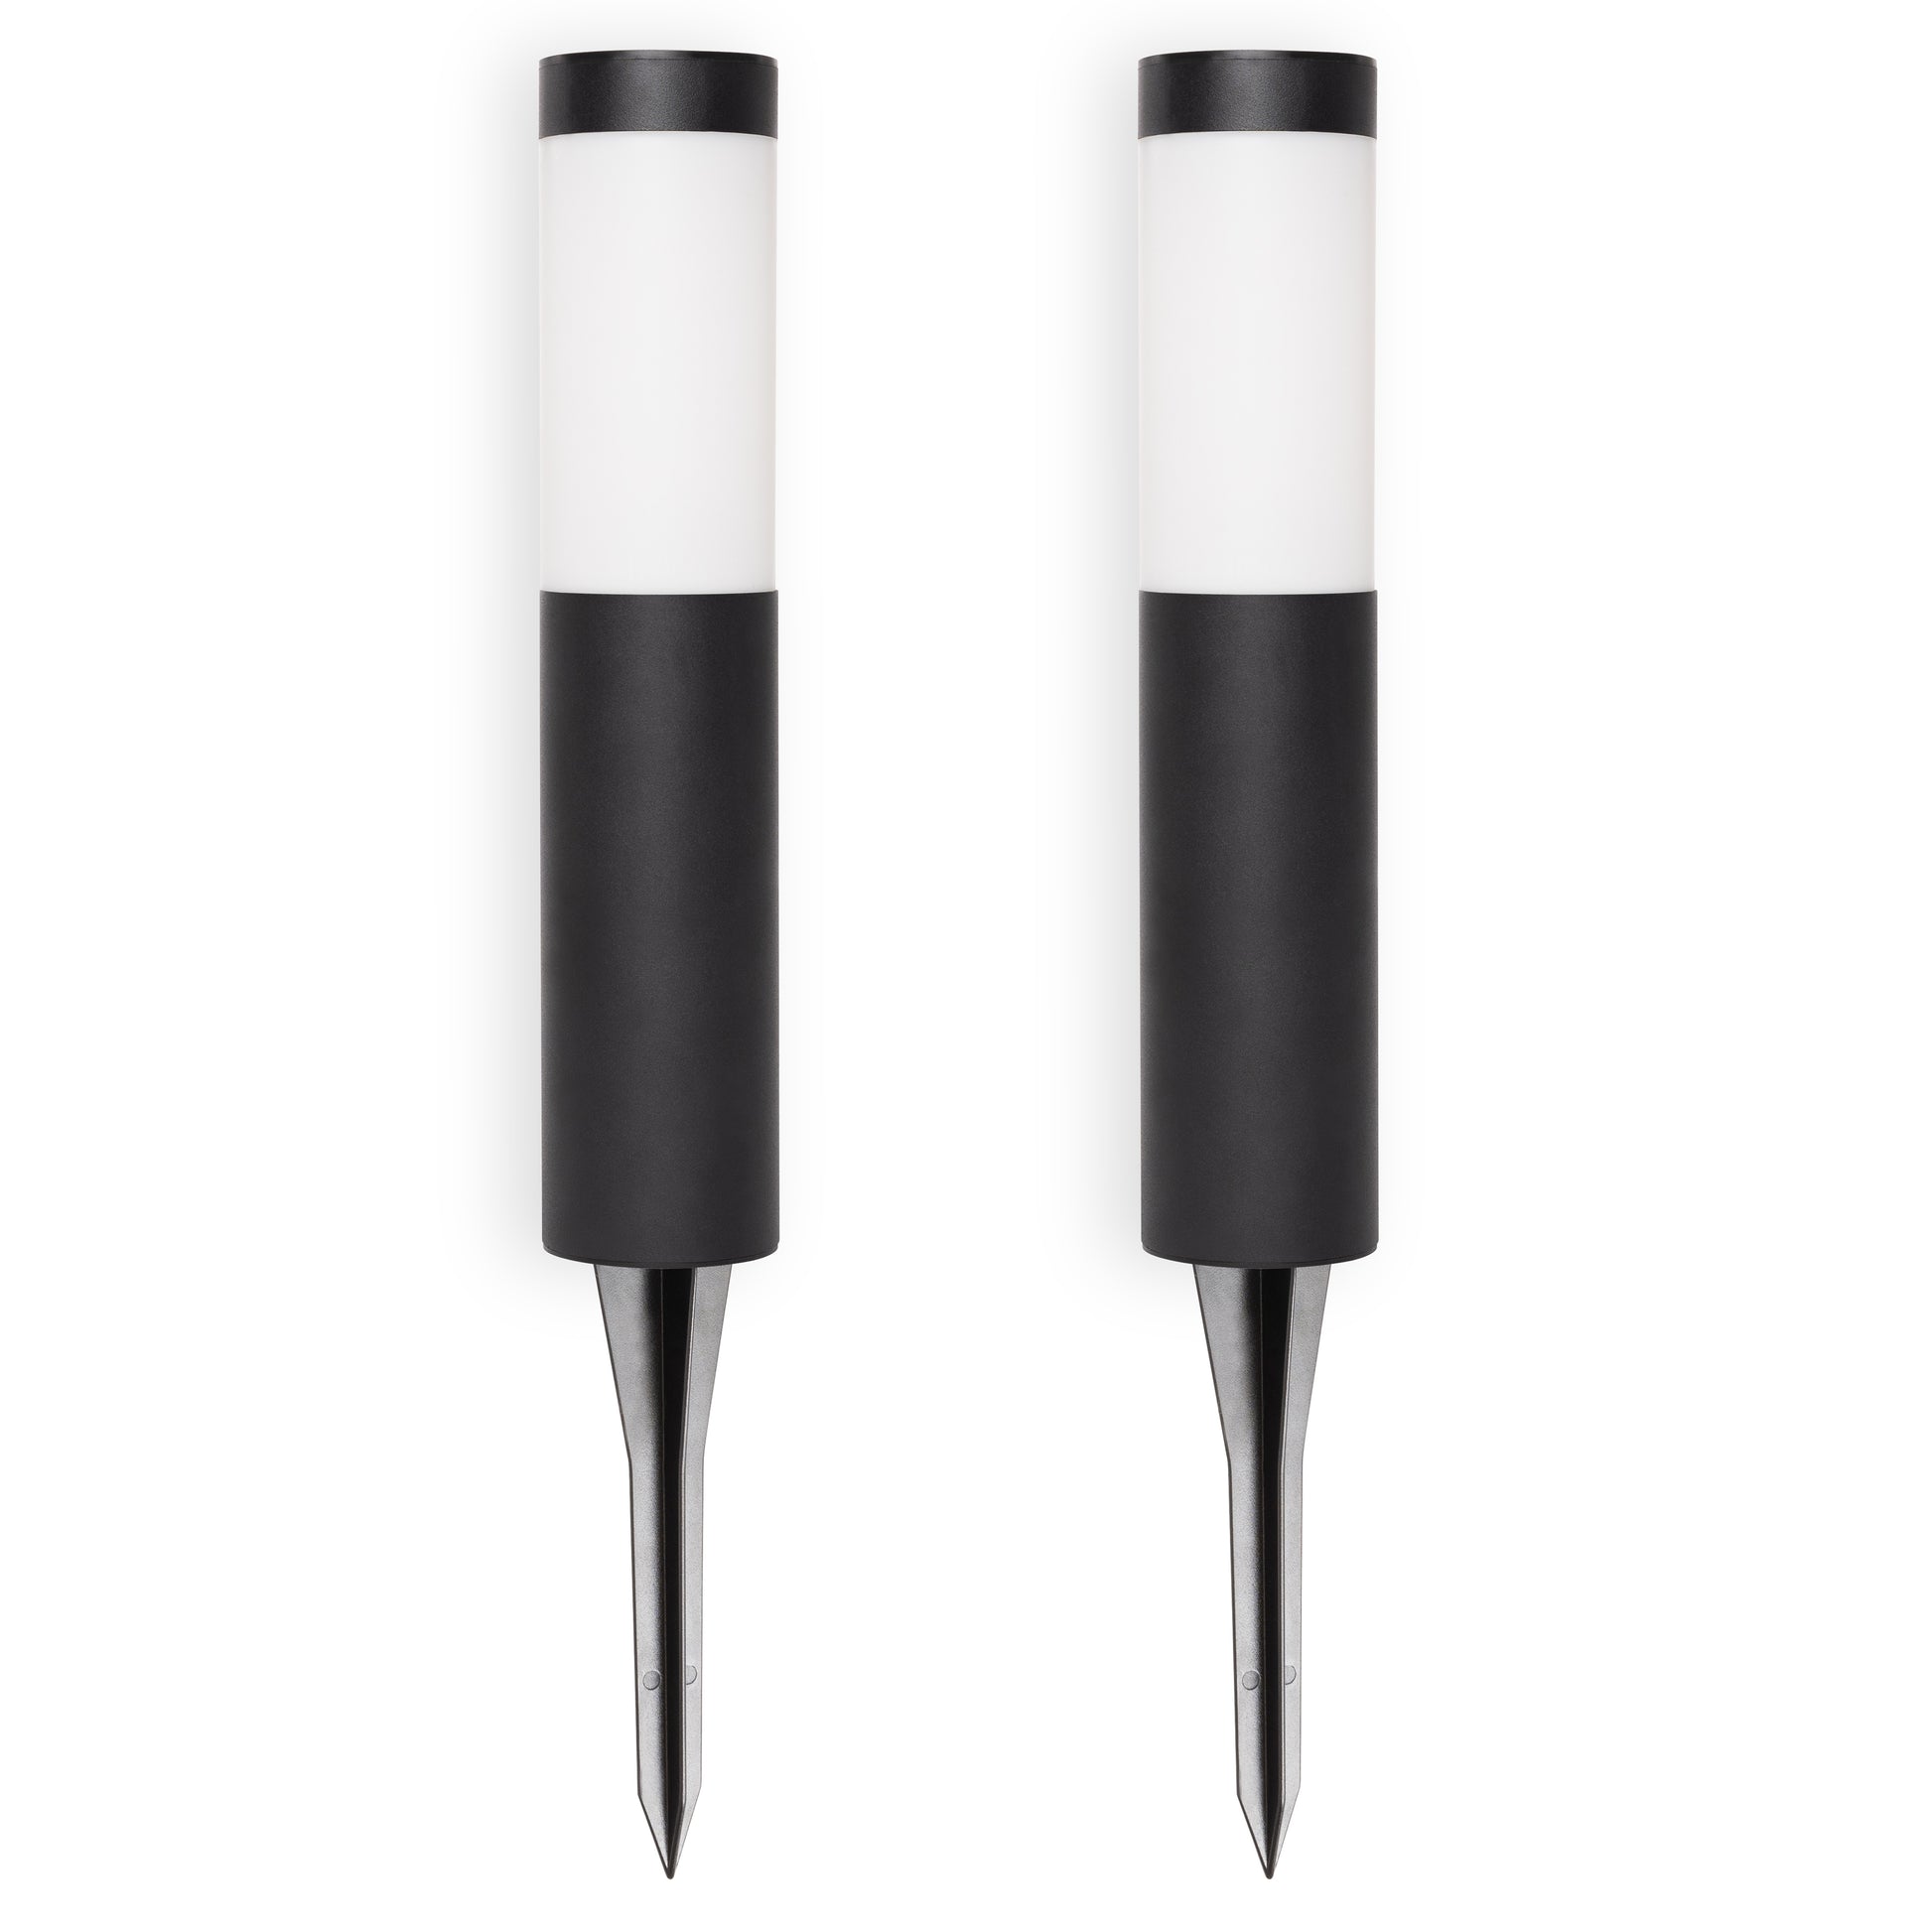 Two black solar ground lights on a white background